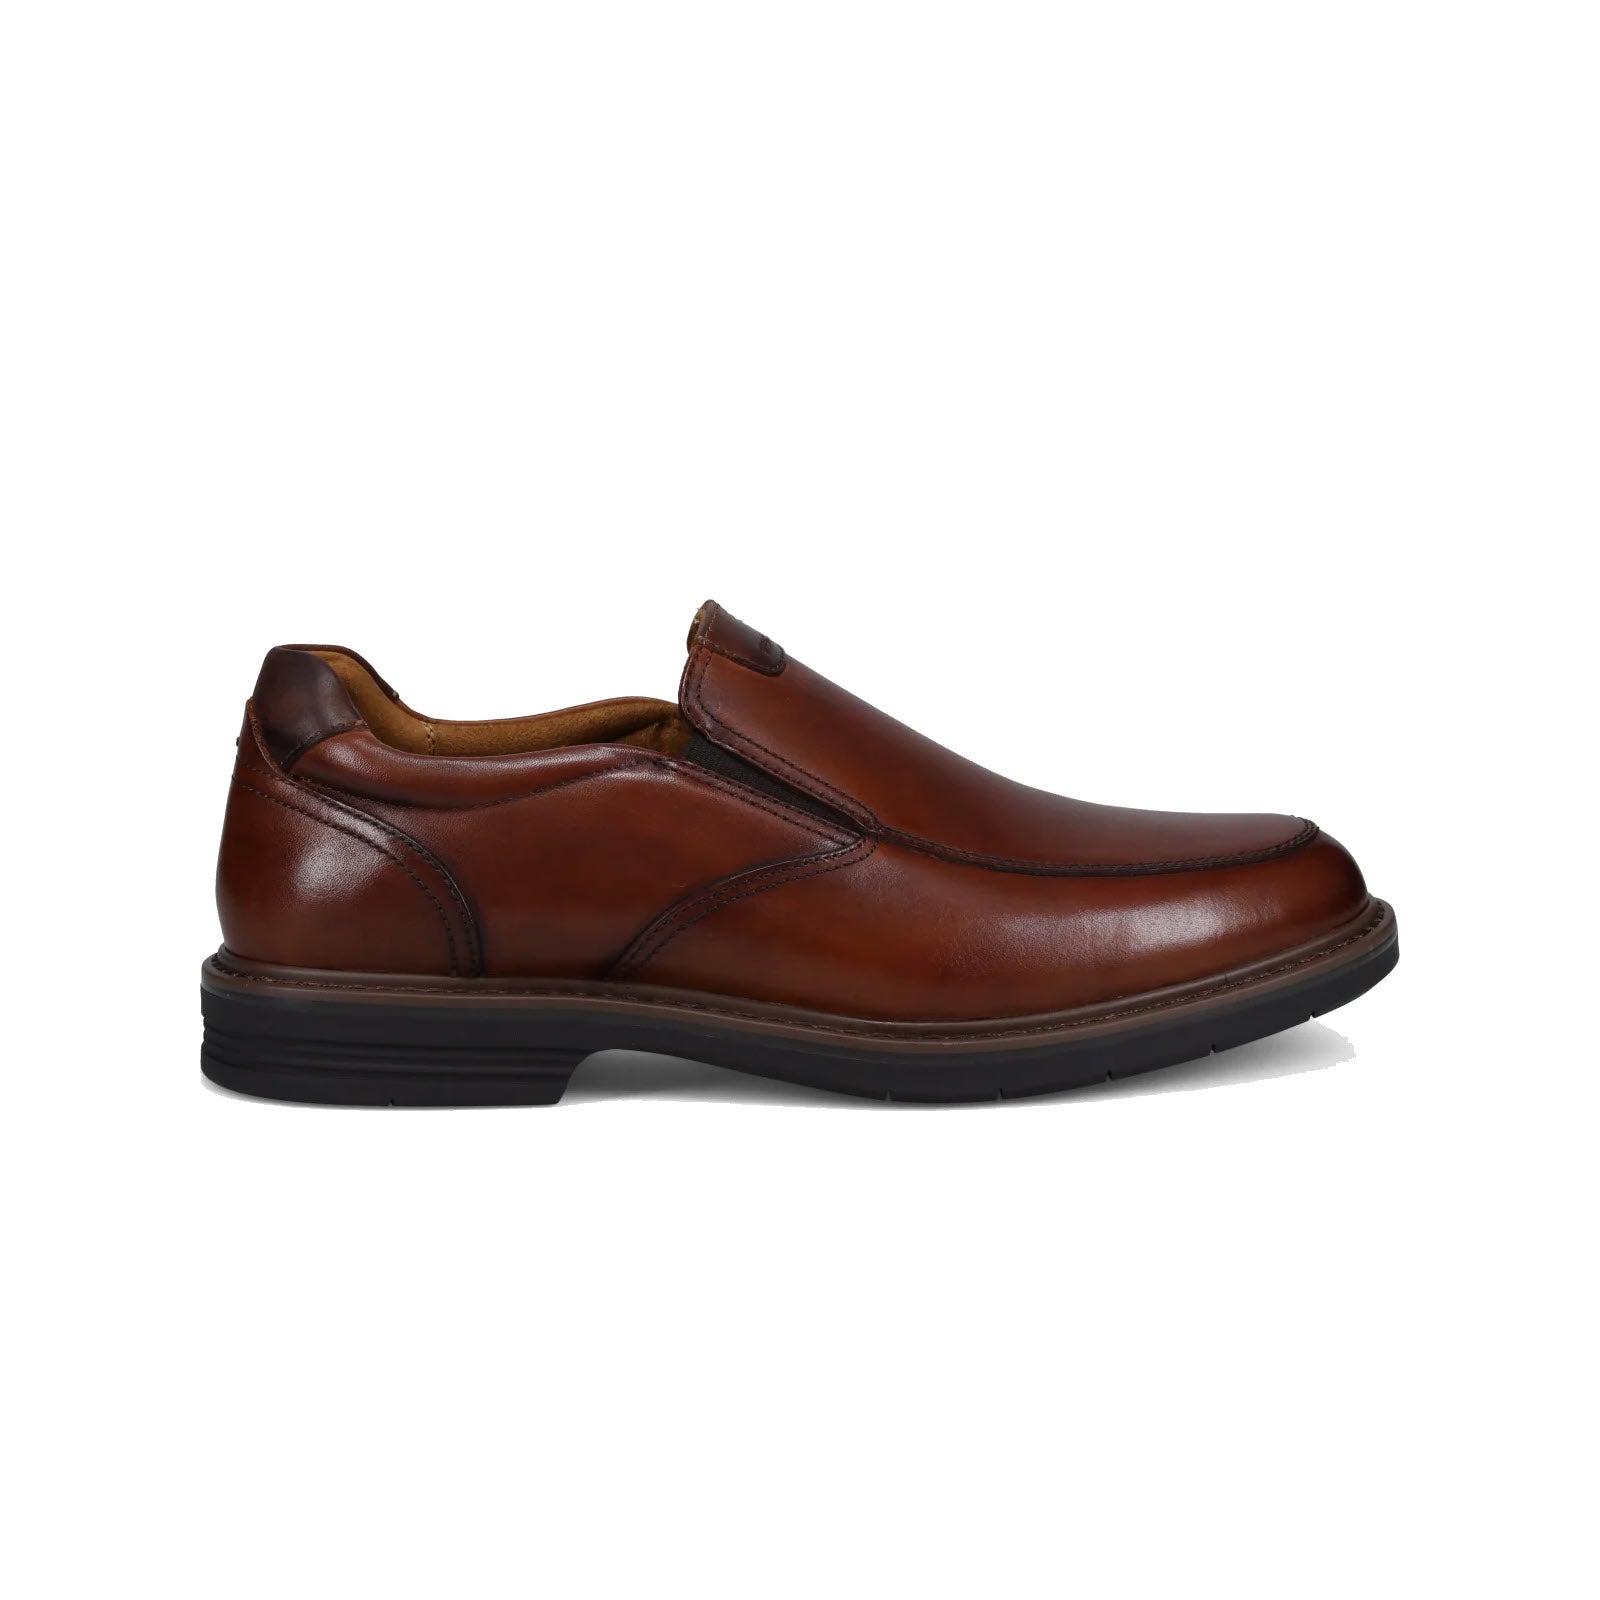 A single brown leather Florsheim Norwalk Moc Toe Slip On Cognac men's dress shoe with elastic side panels and a black sole, displayed against a white background.